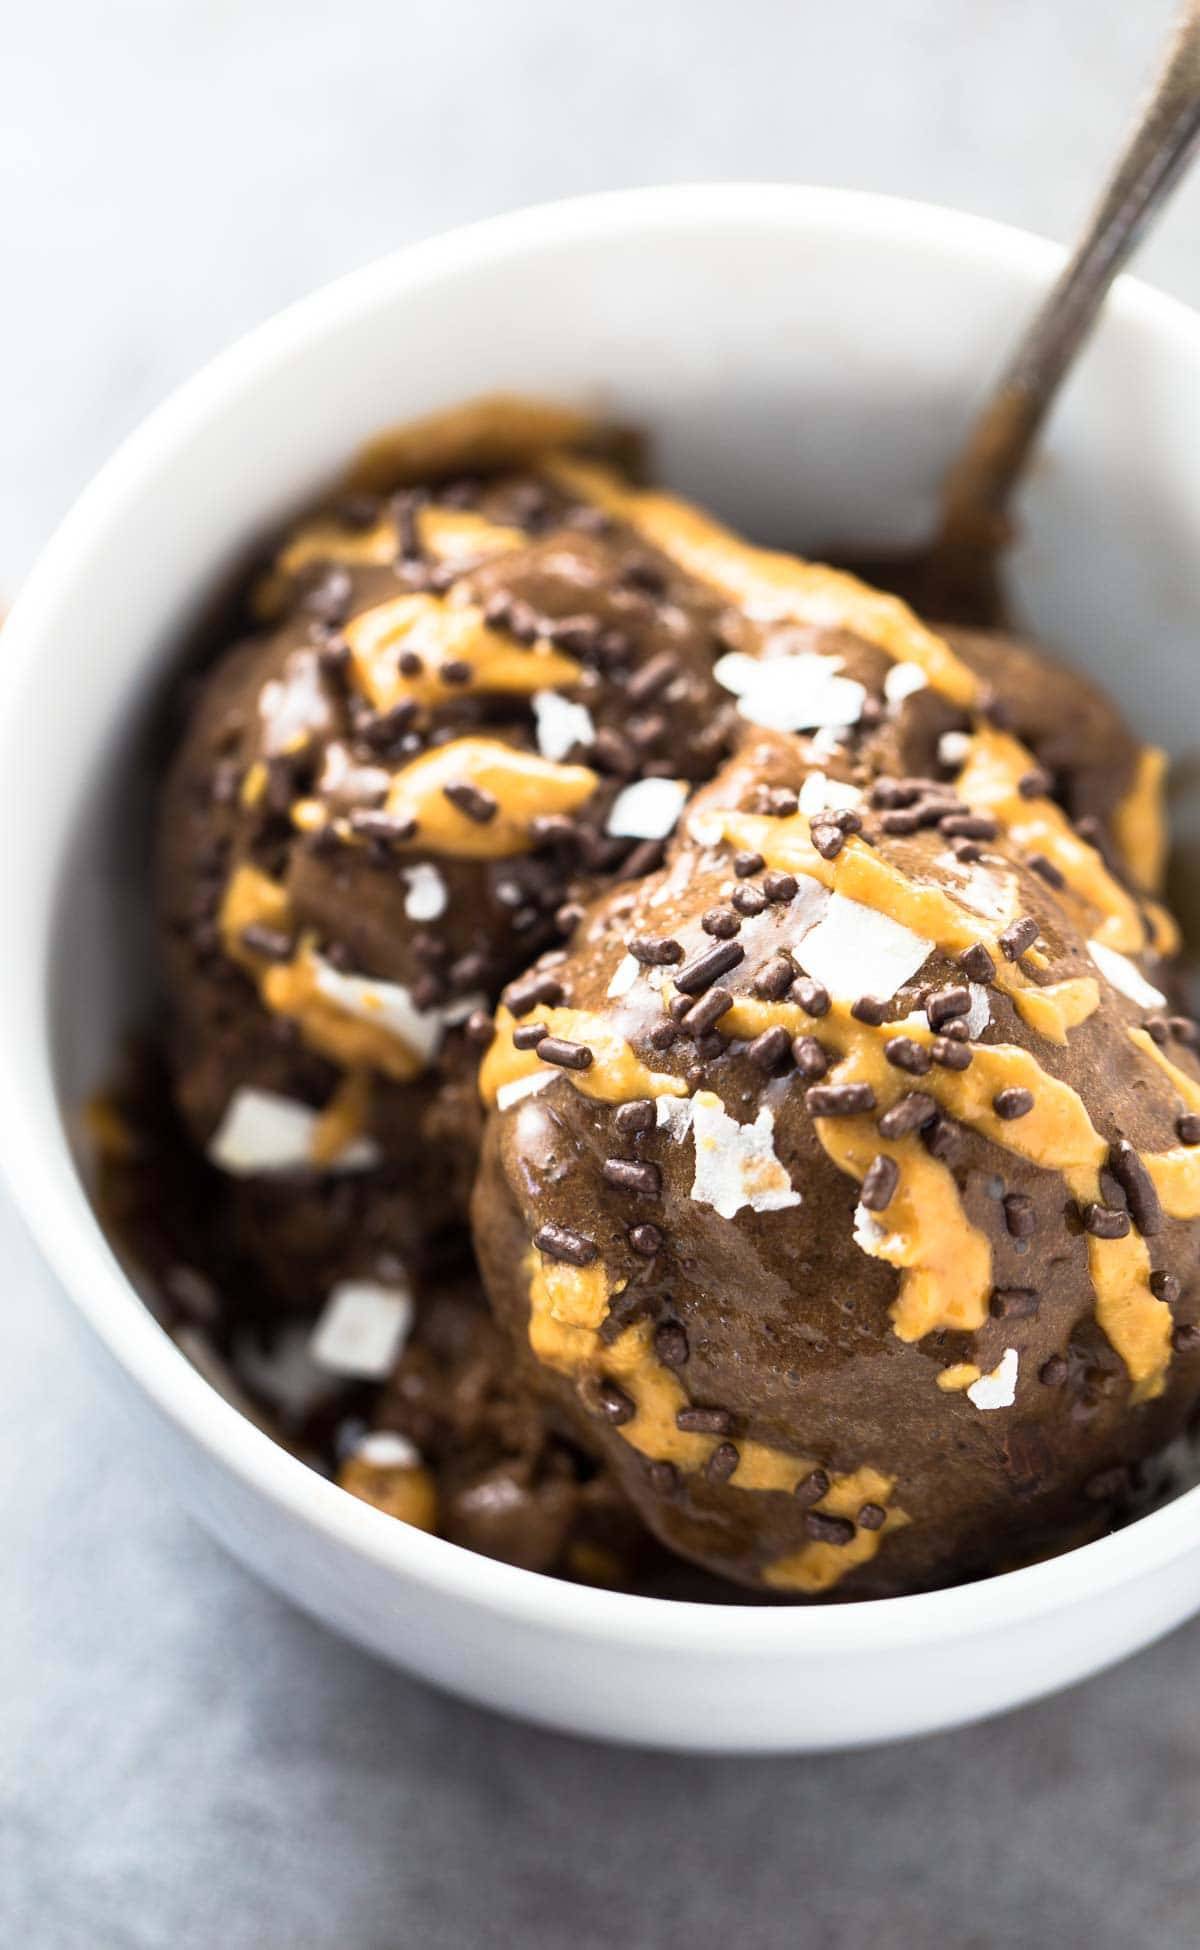 Naturally Sweet Ice Cream recipe - just three simple ingredients and no ice cream maker required! Refined sugar free, dairy free, loaded with chocolate banana and peanut butter flavor! | pinchofyum.com